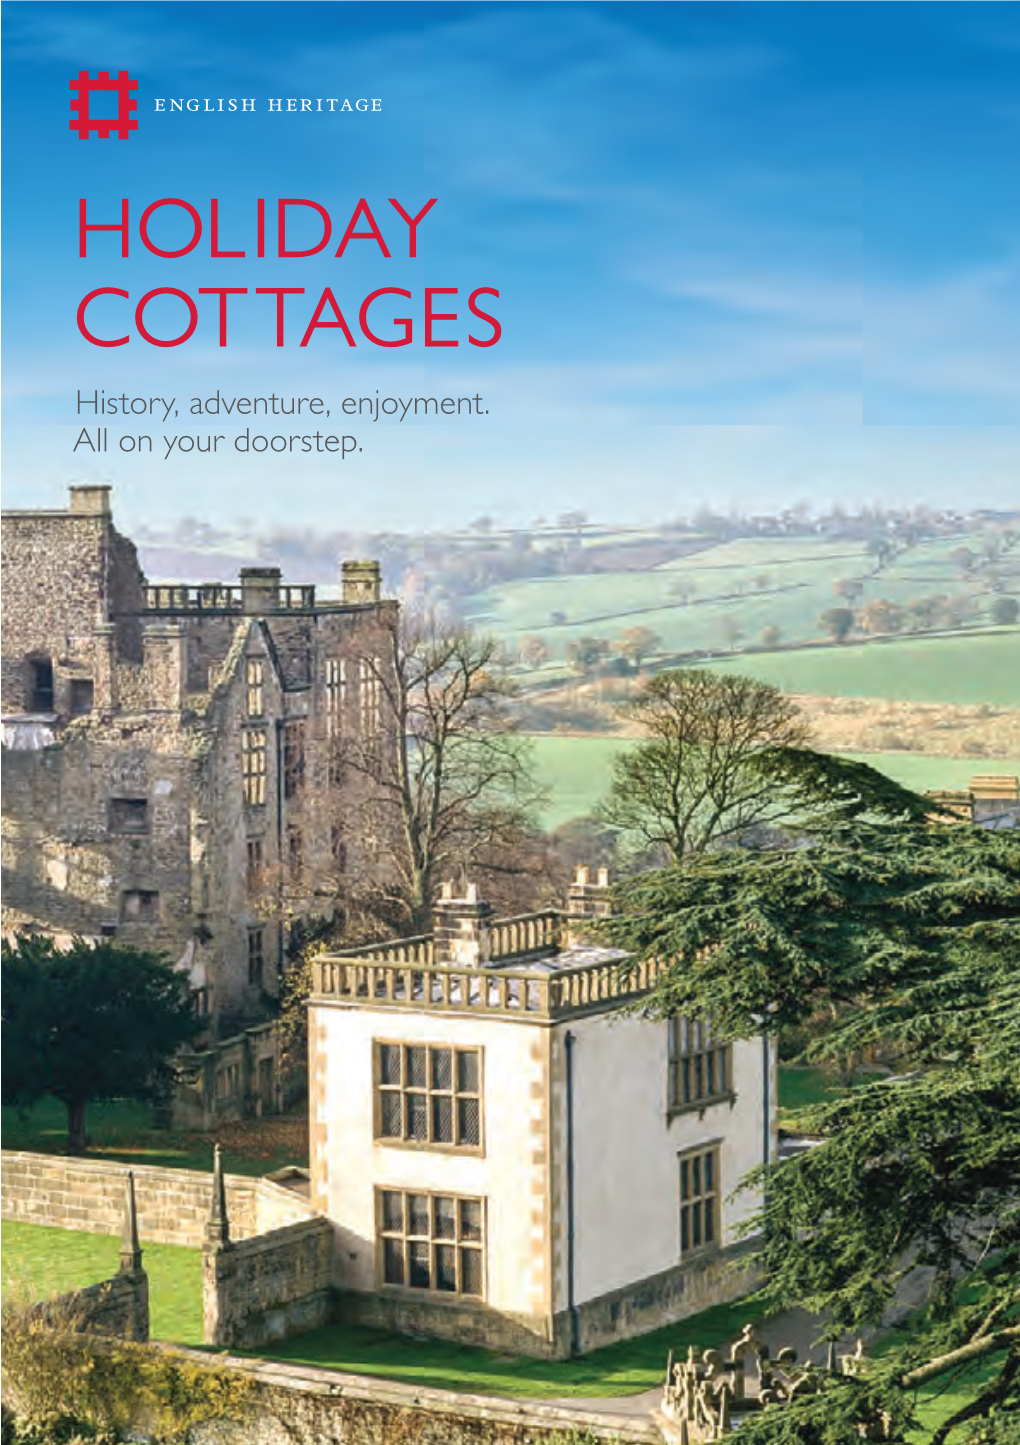 3347 Holiday Cottages Brochure AW.Indd 6 22/11/2016 15:56 WEST of ENGLAND